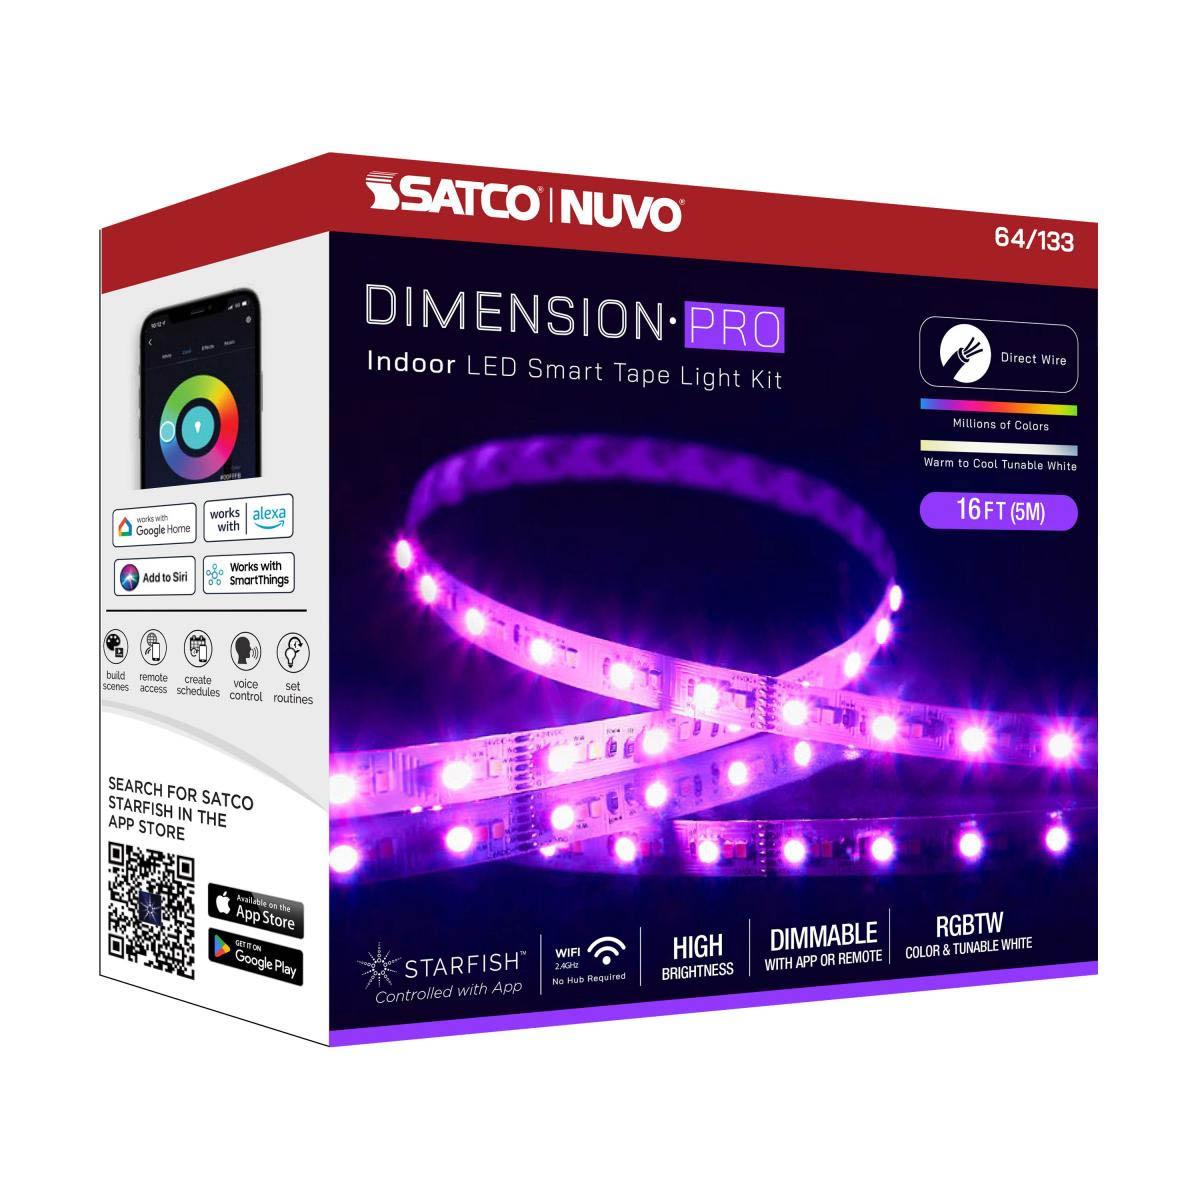 Dimension Pro LED Smart Tape Light Kit with Remote, 16ft Reel, Color Changing RGB and Tunable White, 24V, J-Box Connection - Bees Lighting